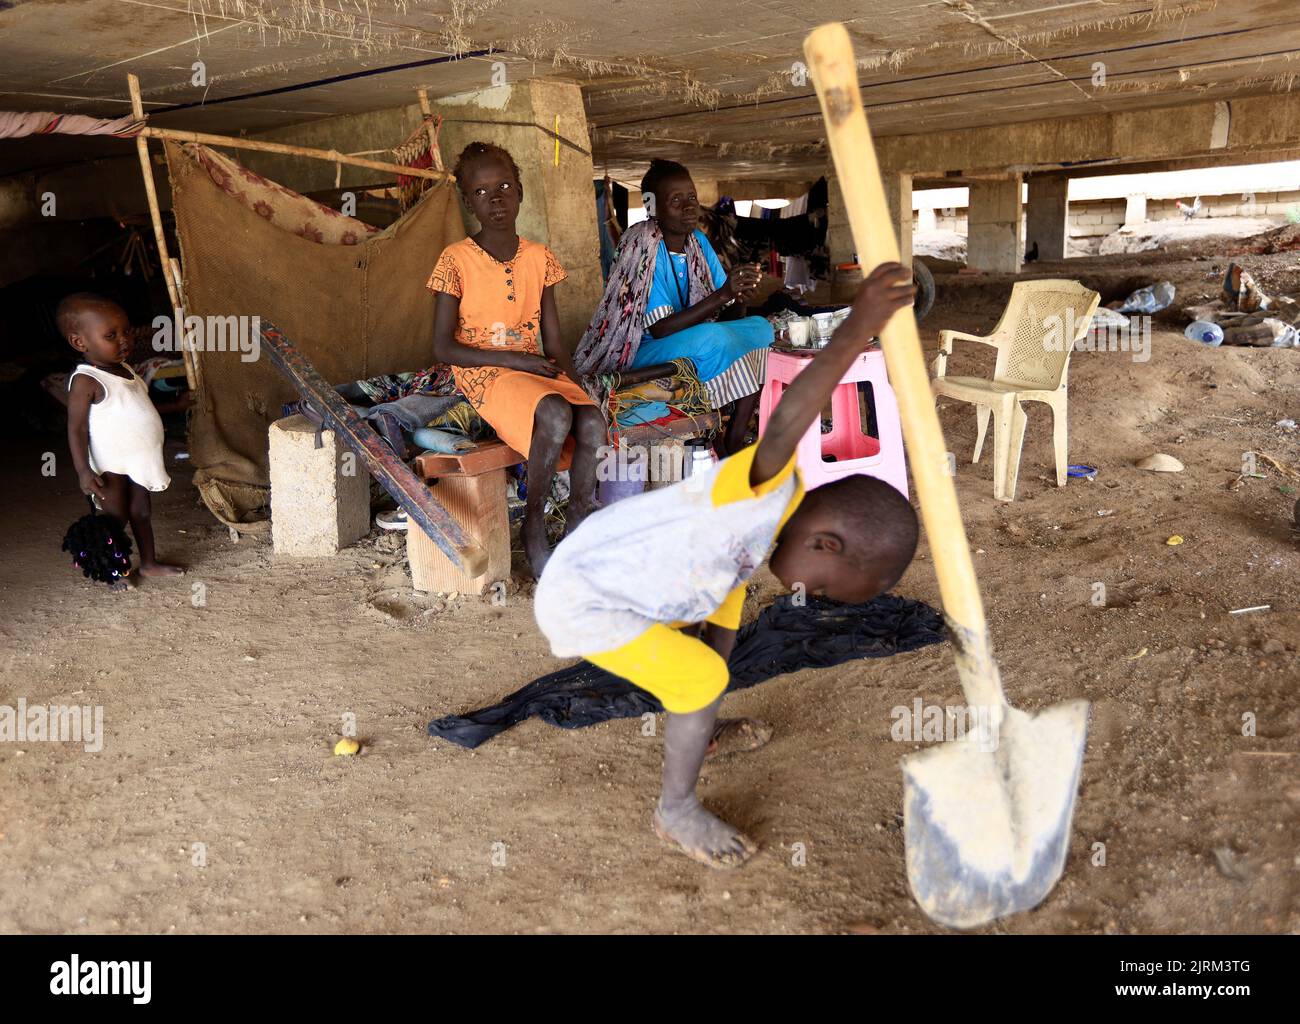 South Sudanese families who returned to Khartoum after the 2011 secession, live in a makeshift shelter in an abandoned plot of land in Bahri, Sudan, August 11, 2022. REUTERS/Mohamed Nureldin Abdallah Stock Photo